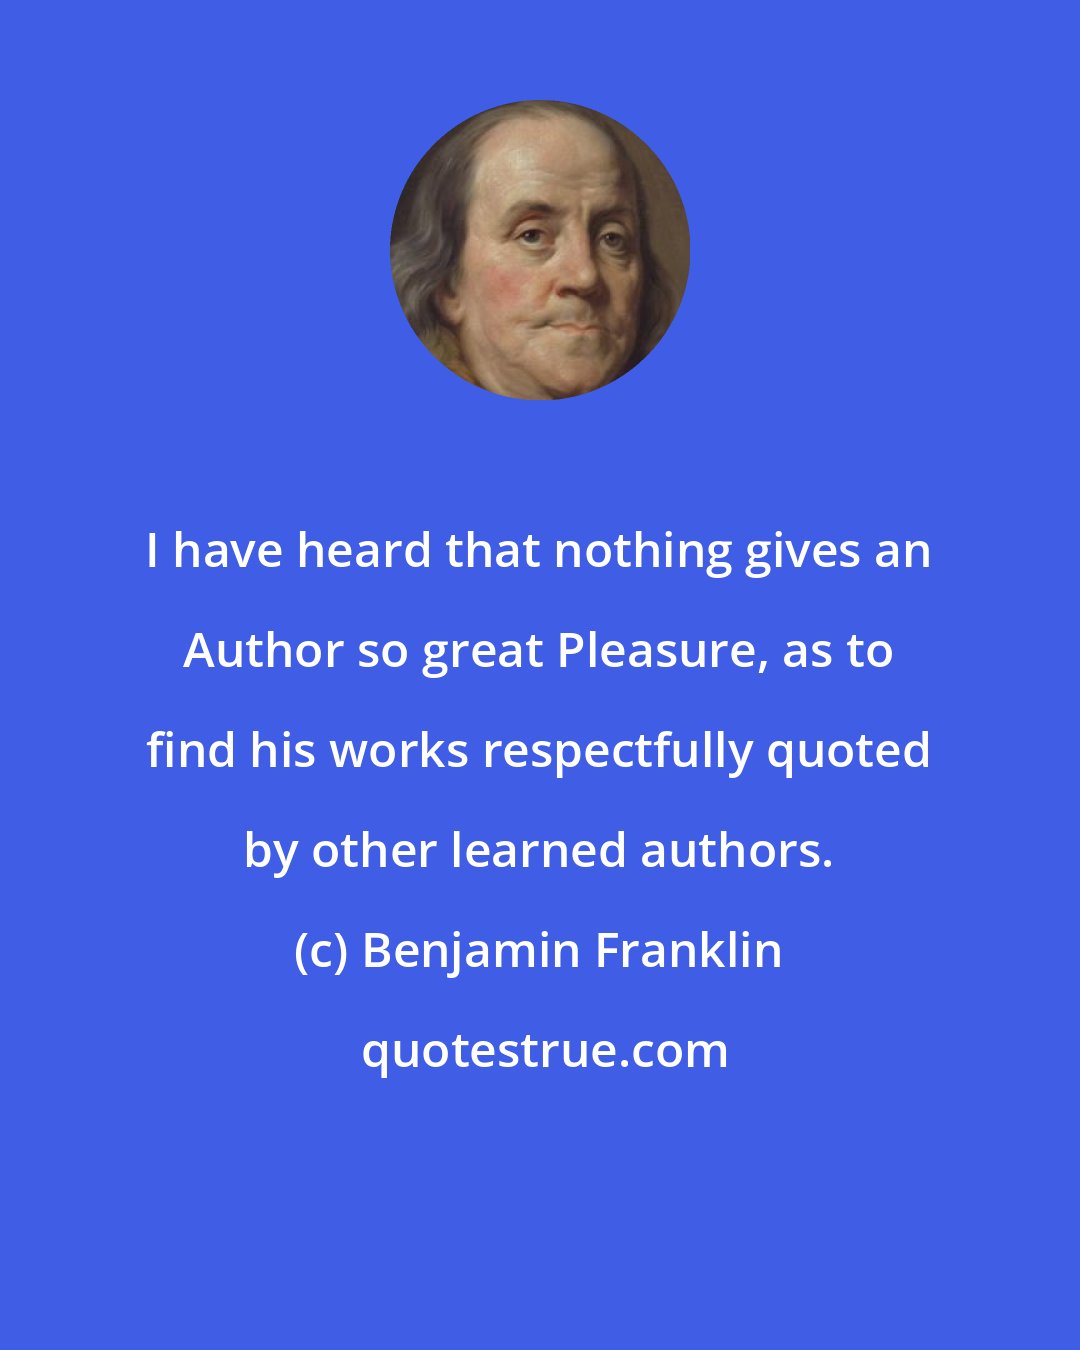 Benjamin Franklin: I have heard that nothing gives an Author so great Pleasure, as to find his works respectfully quoted by other learned authors.